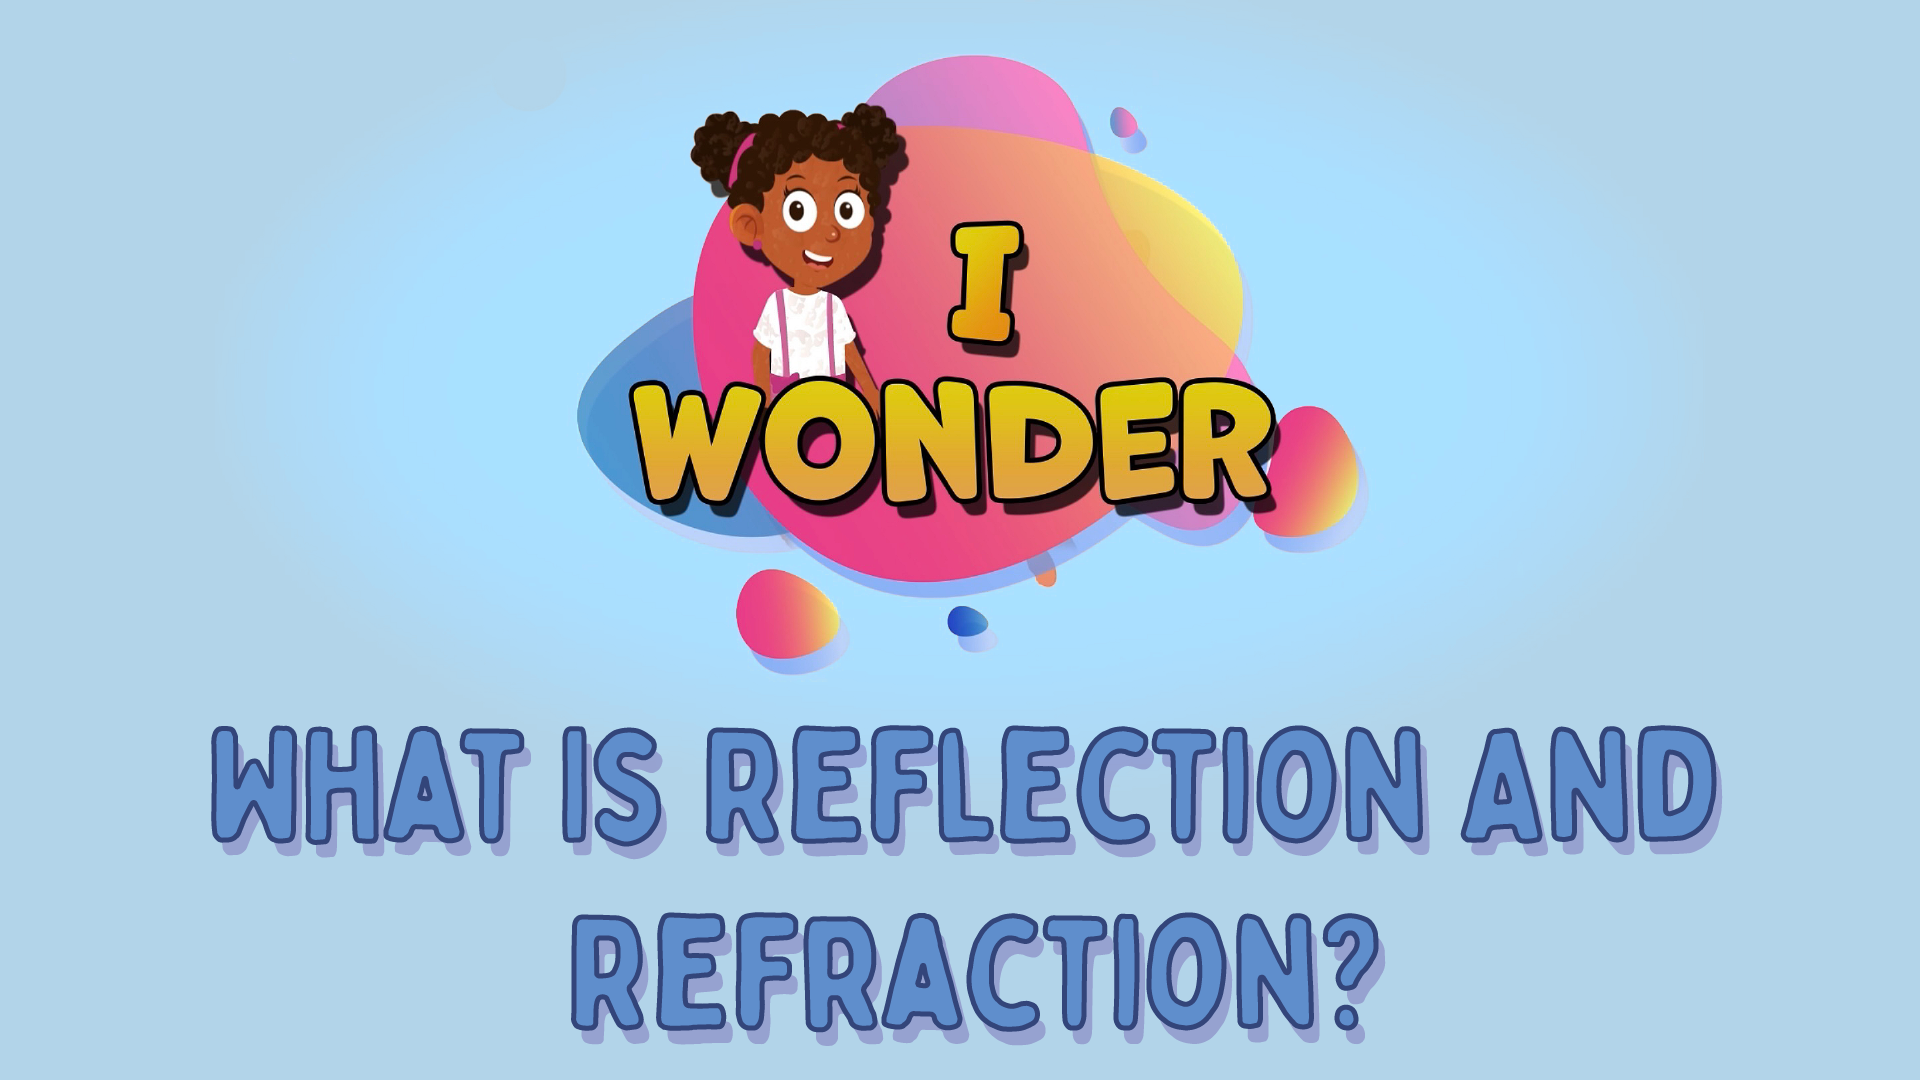 What Is Reflection And Refraction?